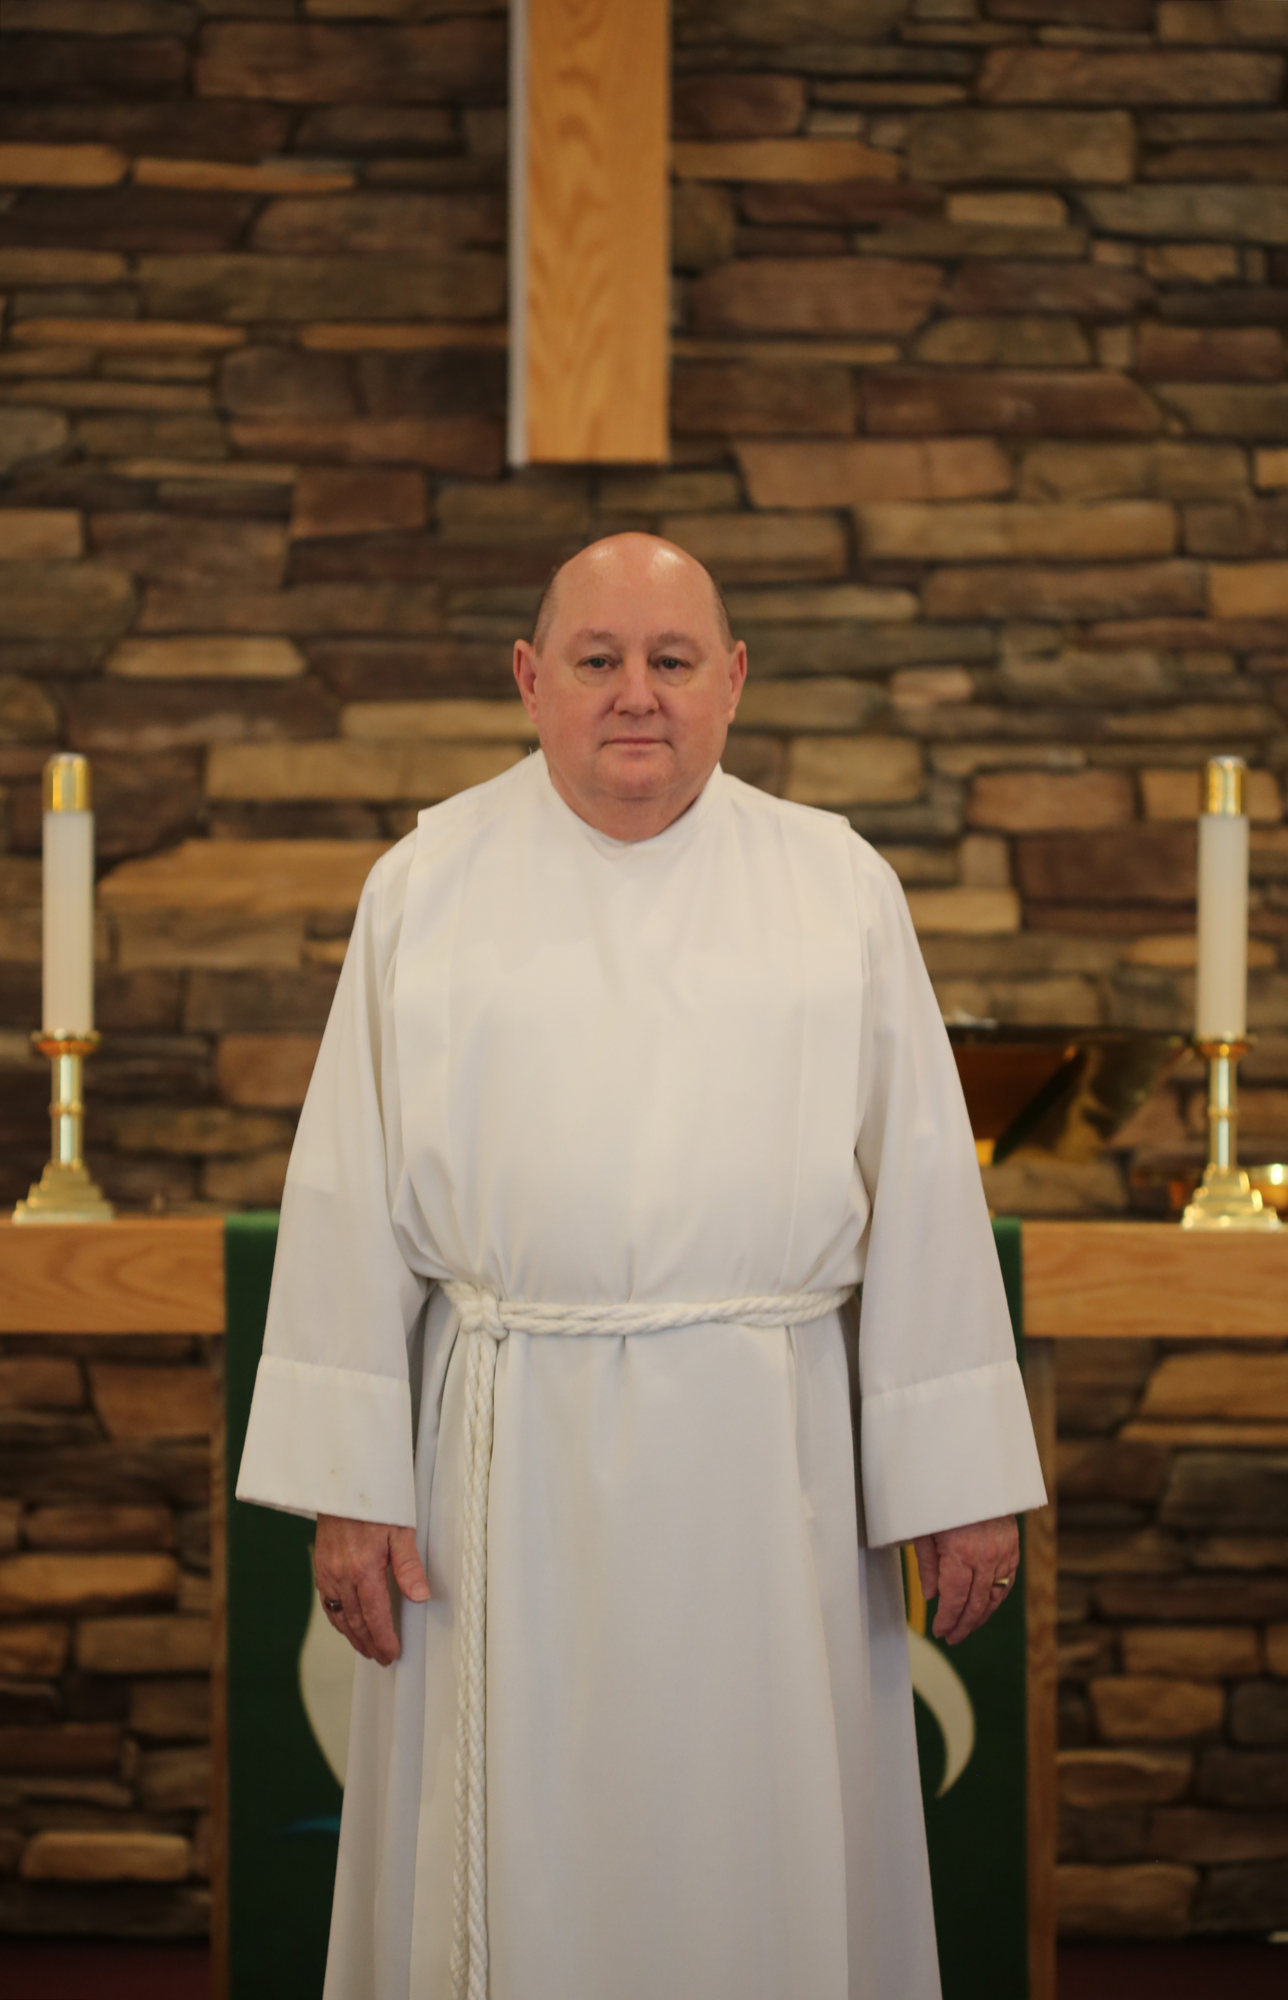 Christ Lutheran Church of Bunnell welcomed many visitors to the service on Sunday, June 10, as they celebrated  the installation of John Johnson to the position of assistant pastor. Photo courtesy of Don Roach